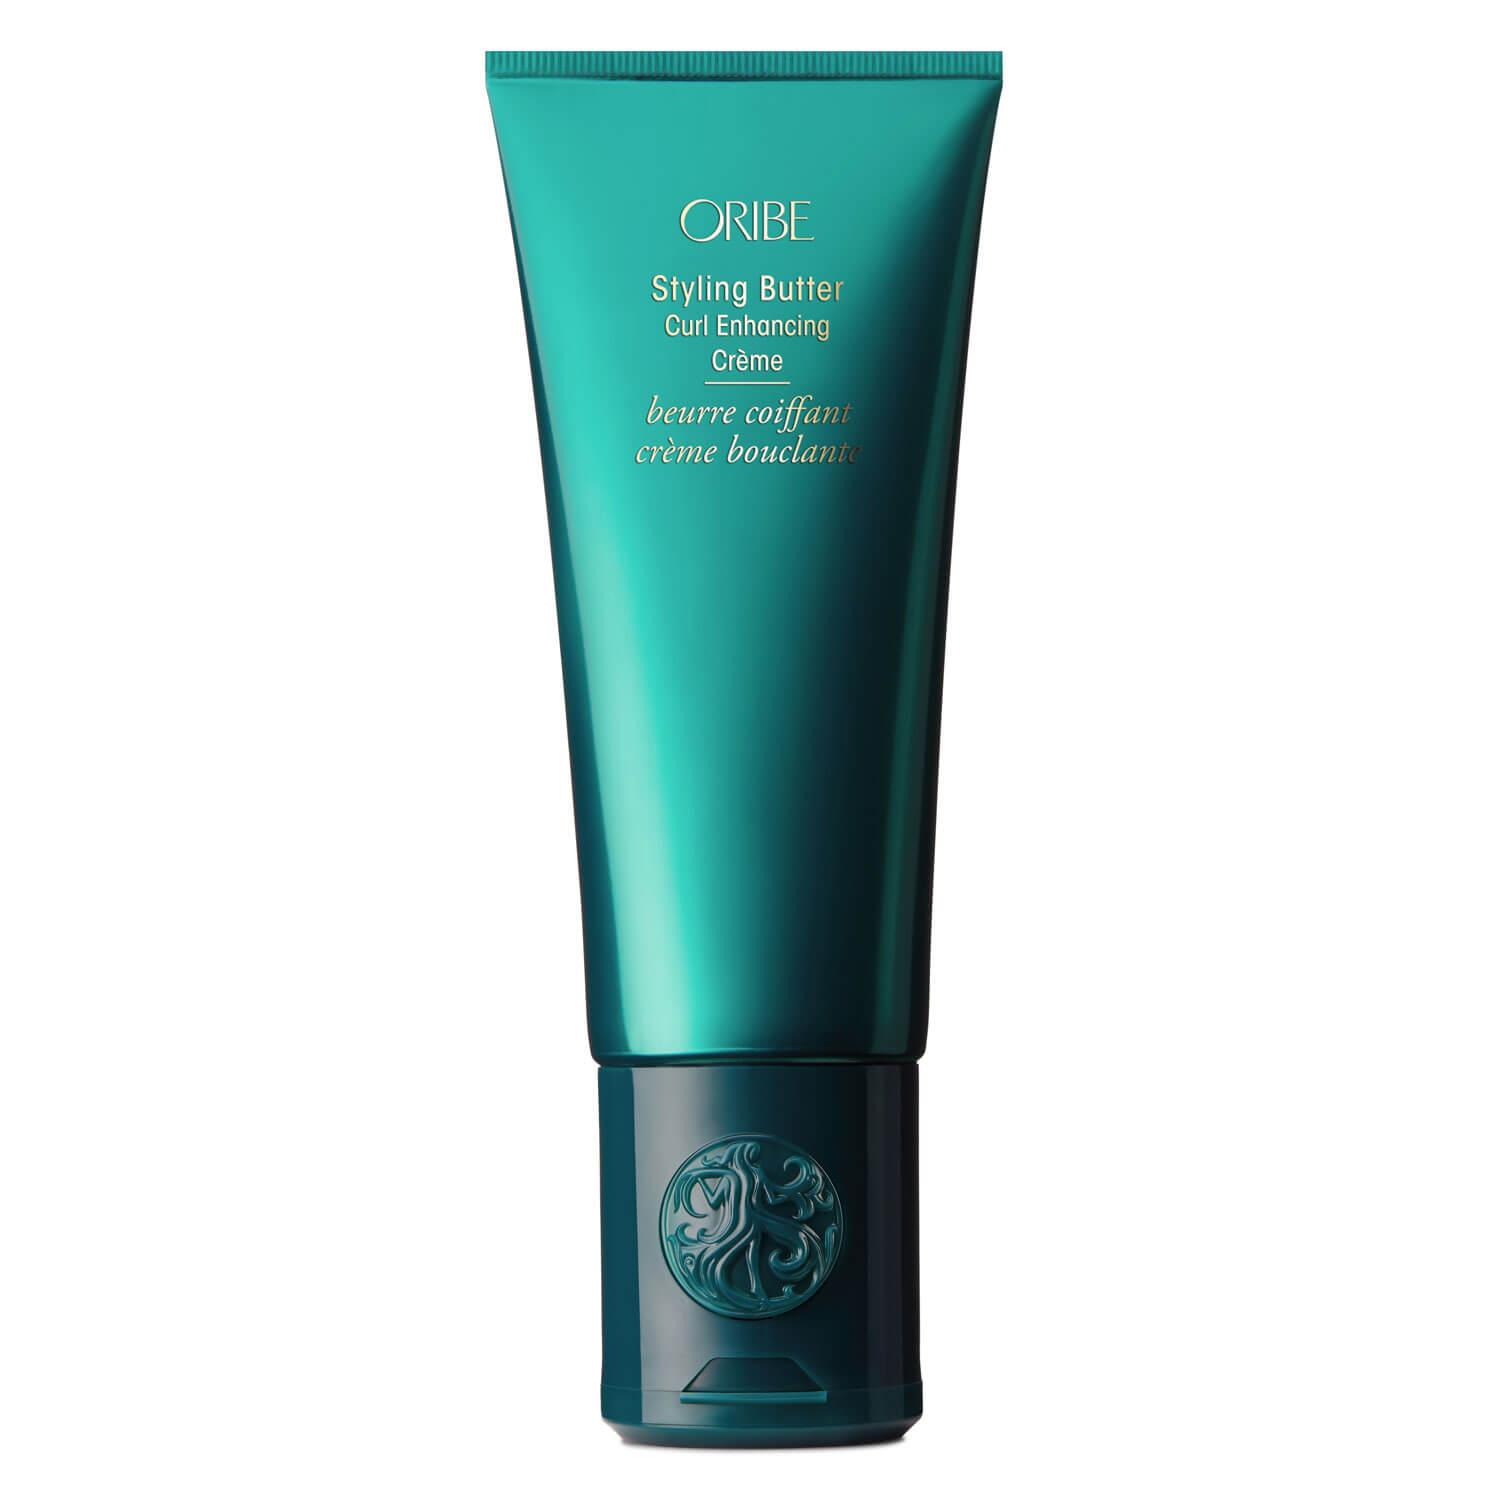 Oribe Style - Styling Butter Curl Enhancing Crème